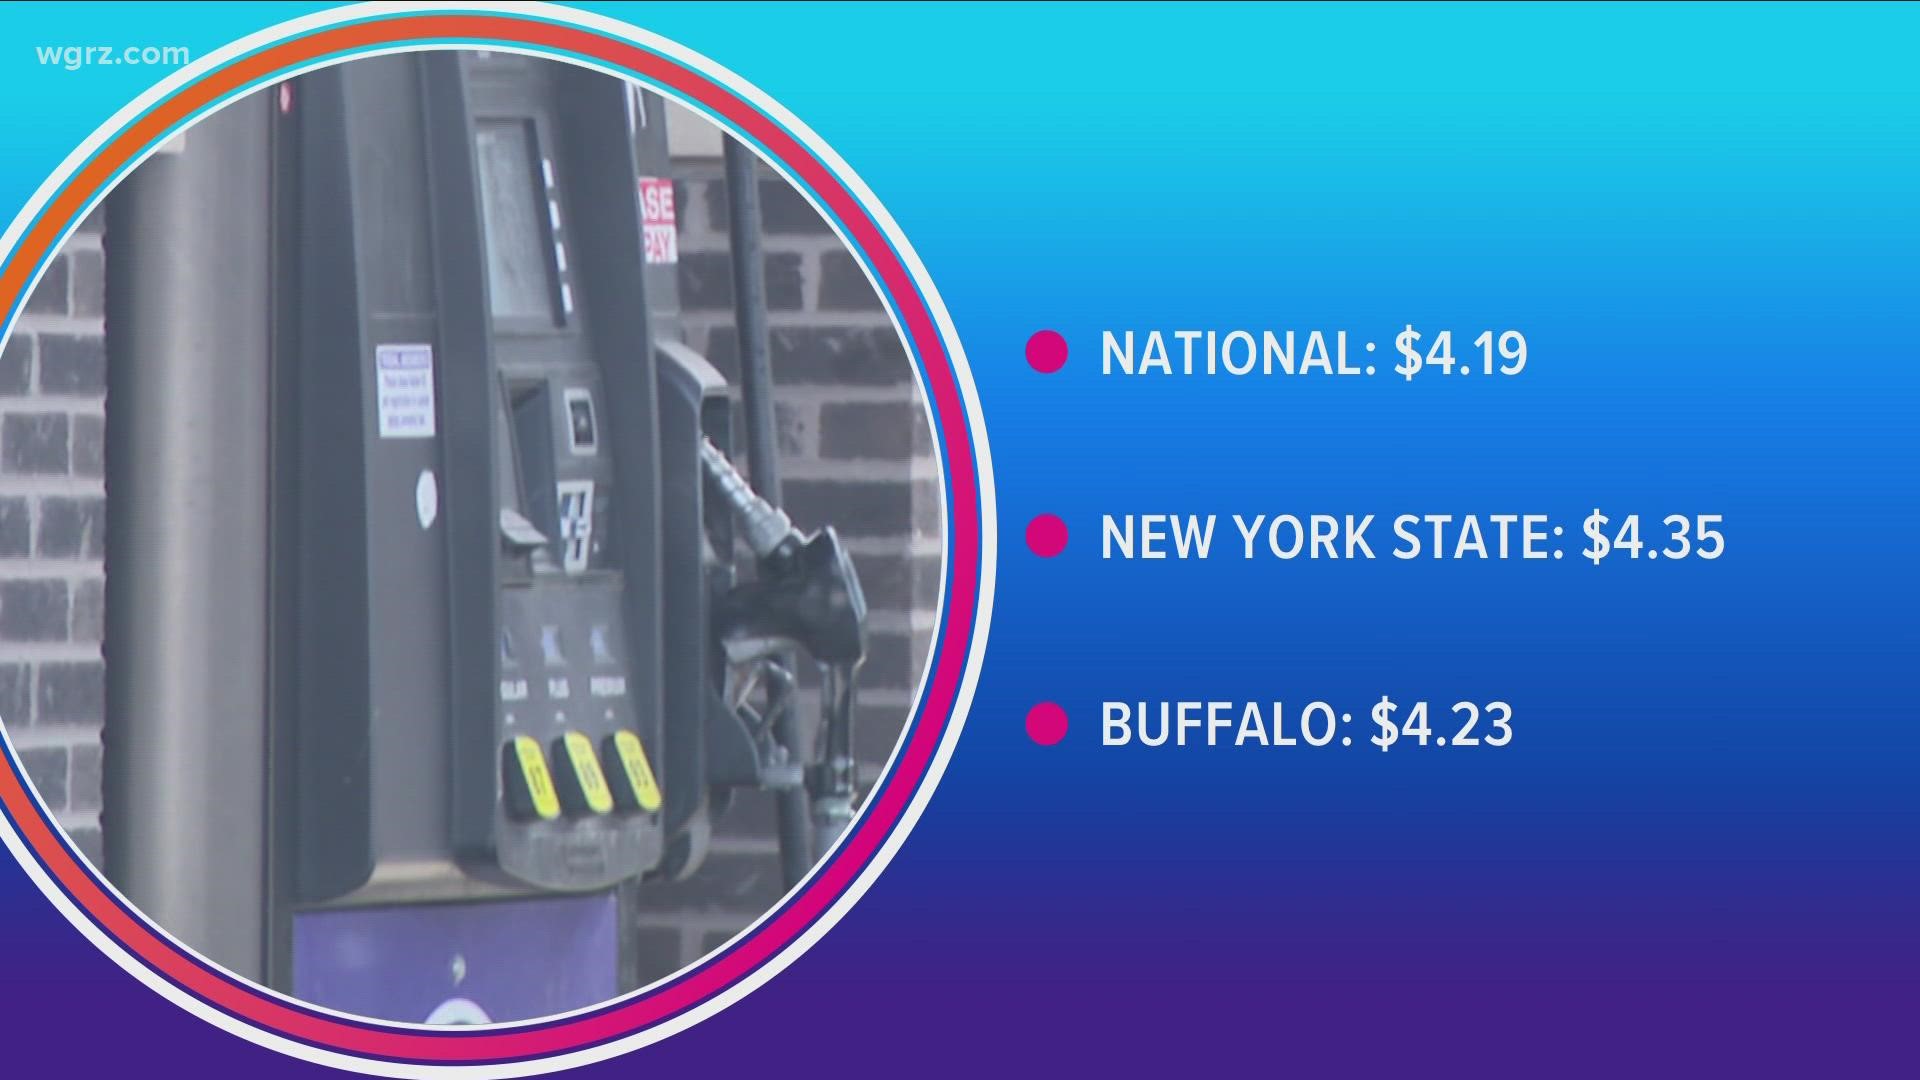 In Buffalo the average being $4.23 only up two cents from last week.